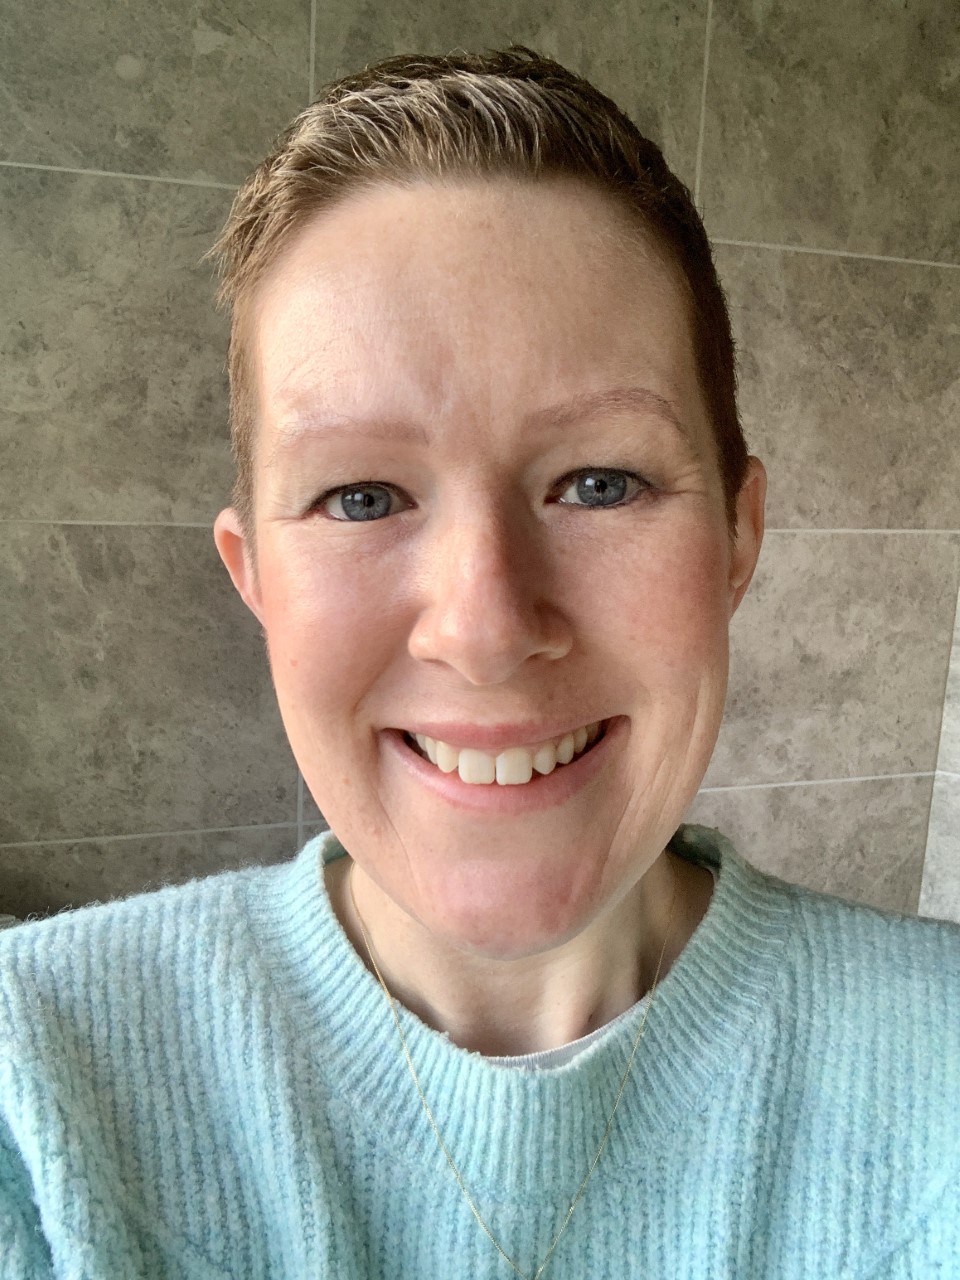 Mum-of-three Mel Bunting, from Garstang, recently had surgery to treat breast cancer. She describes how she sought to improve her health before surgery.